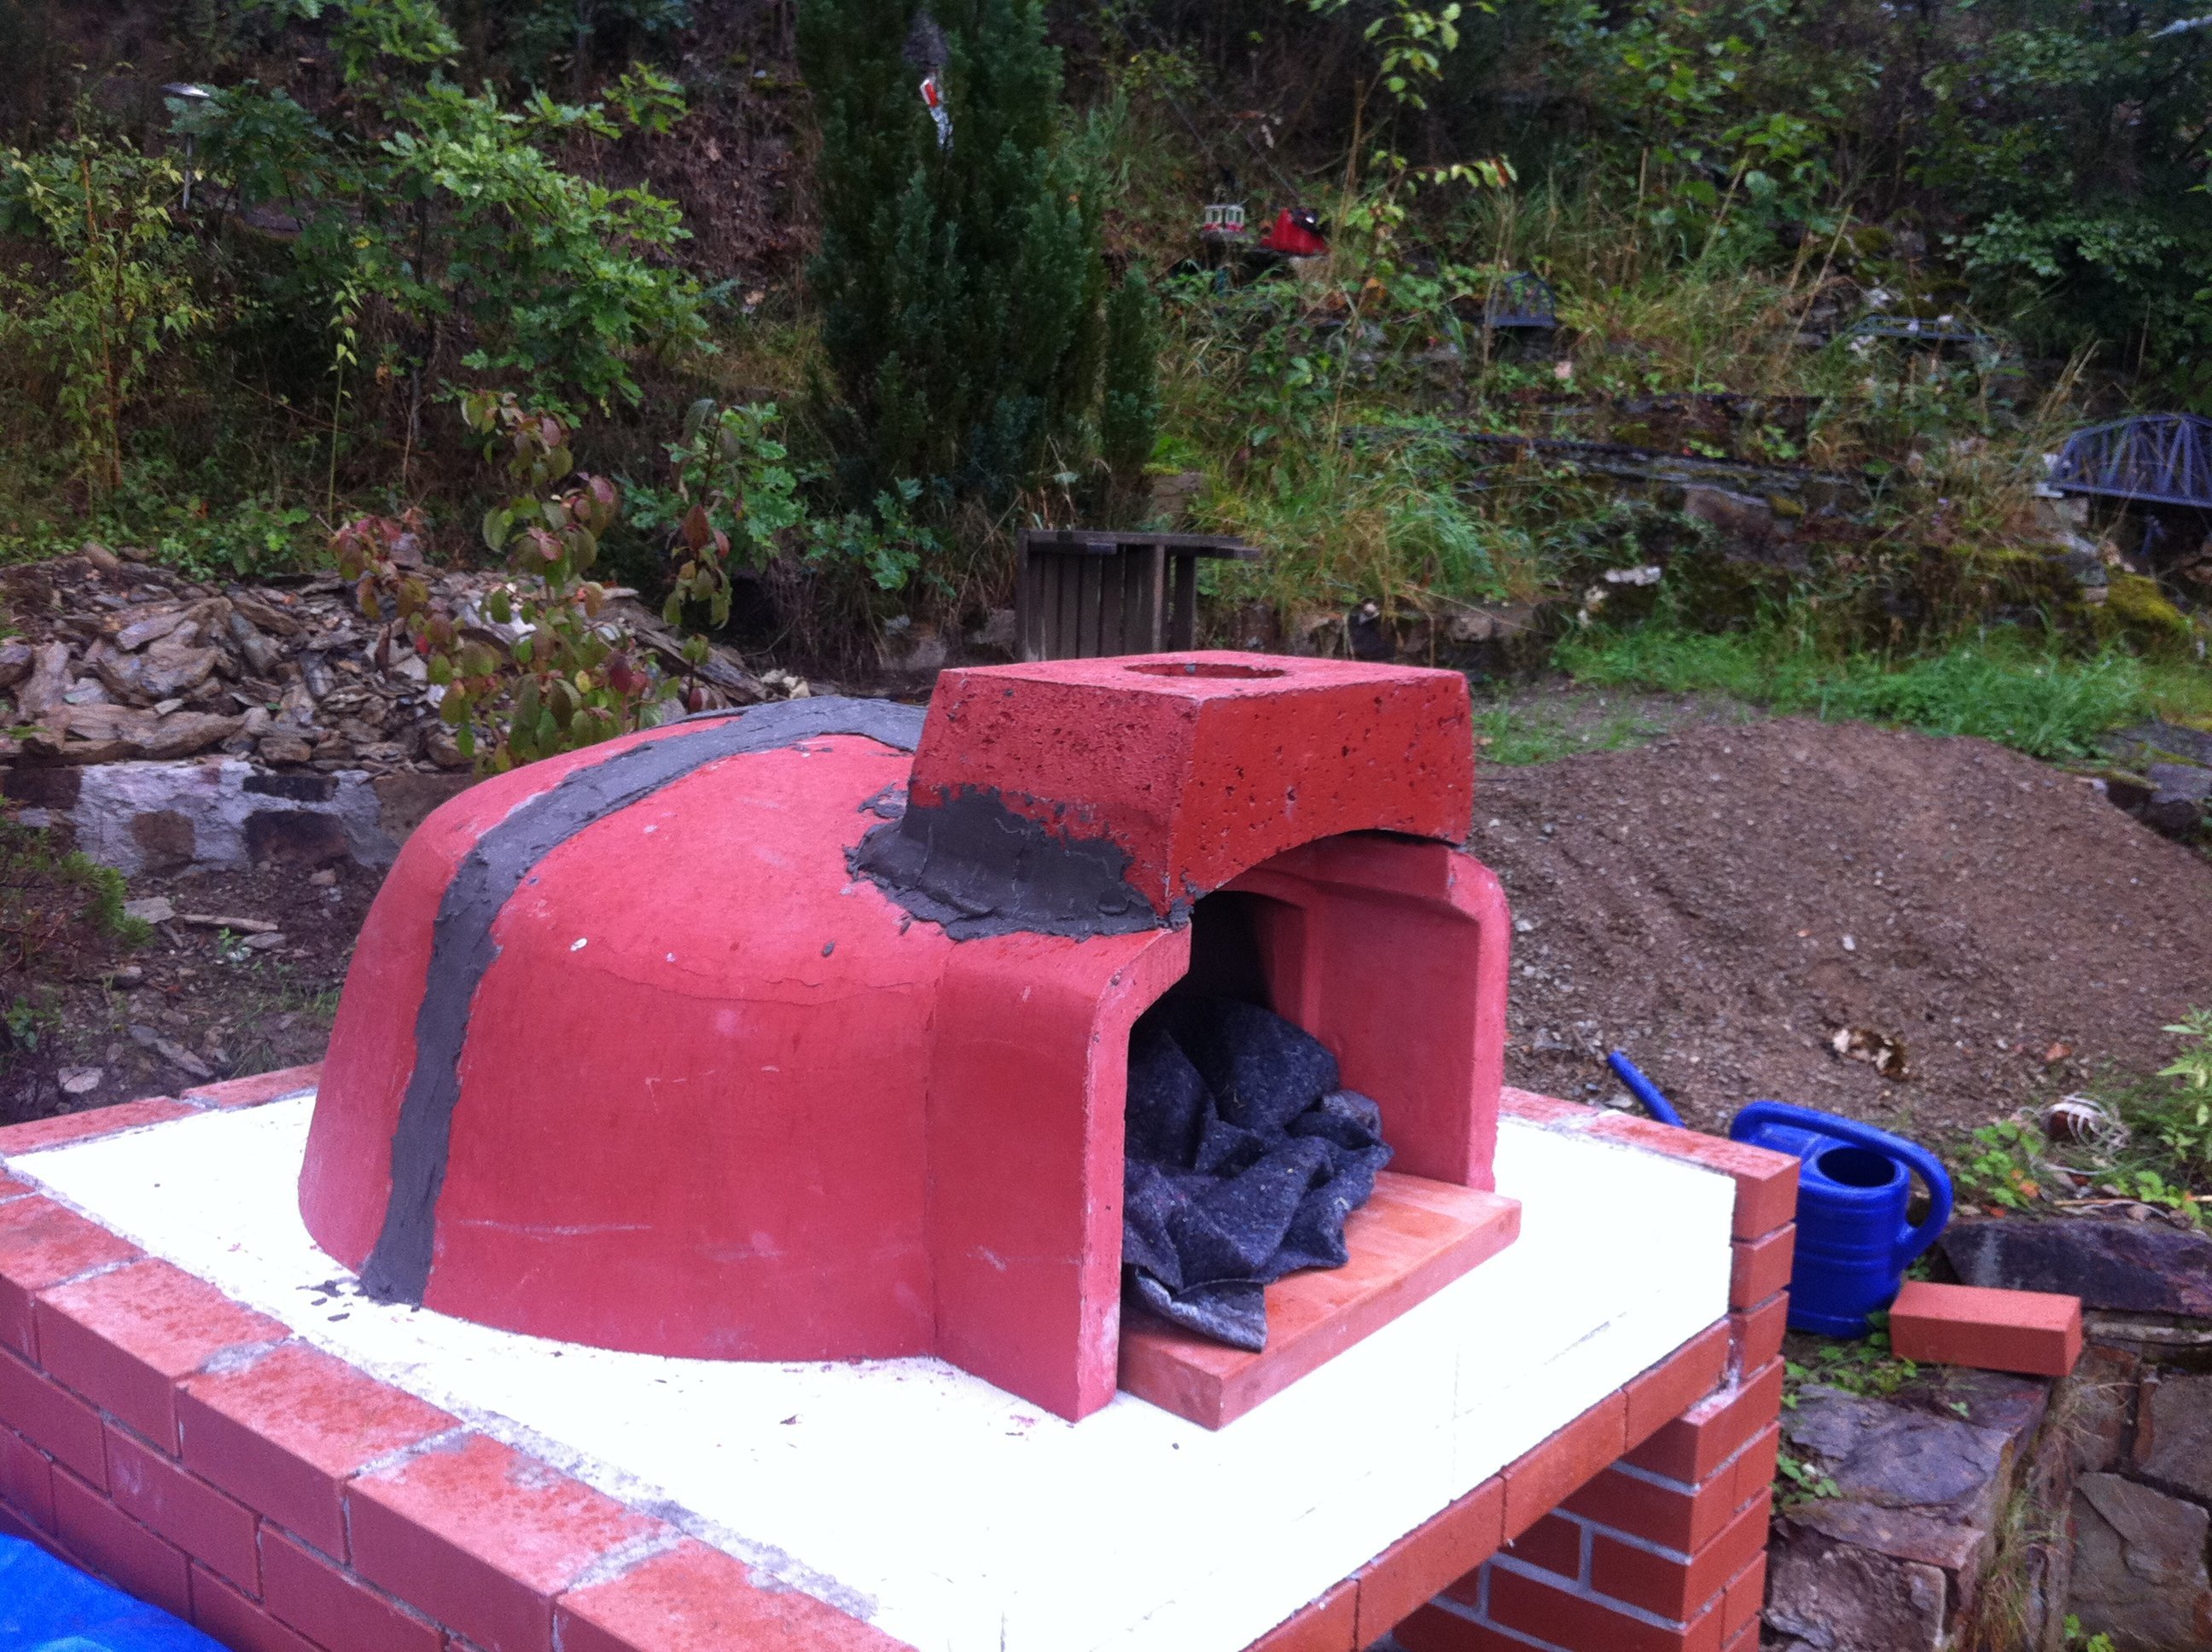 Pizza oven Valoriani FVR kit with smoke connection, brick arch and insulation set